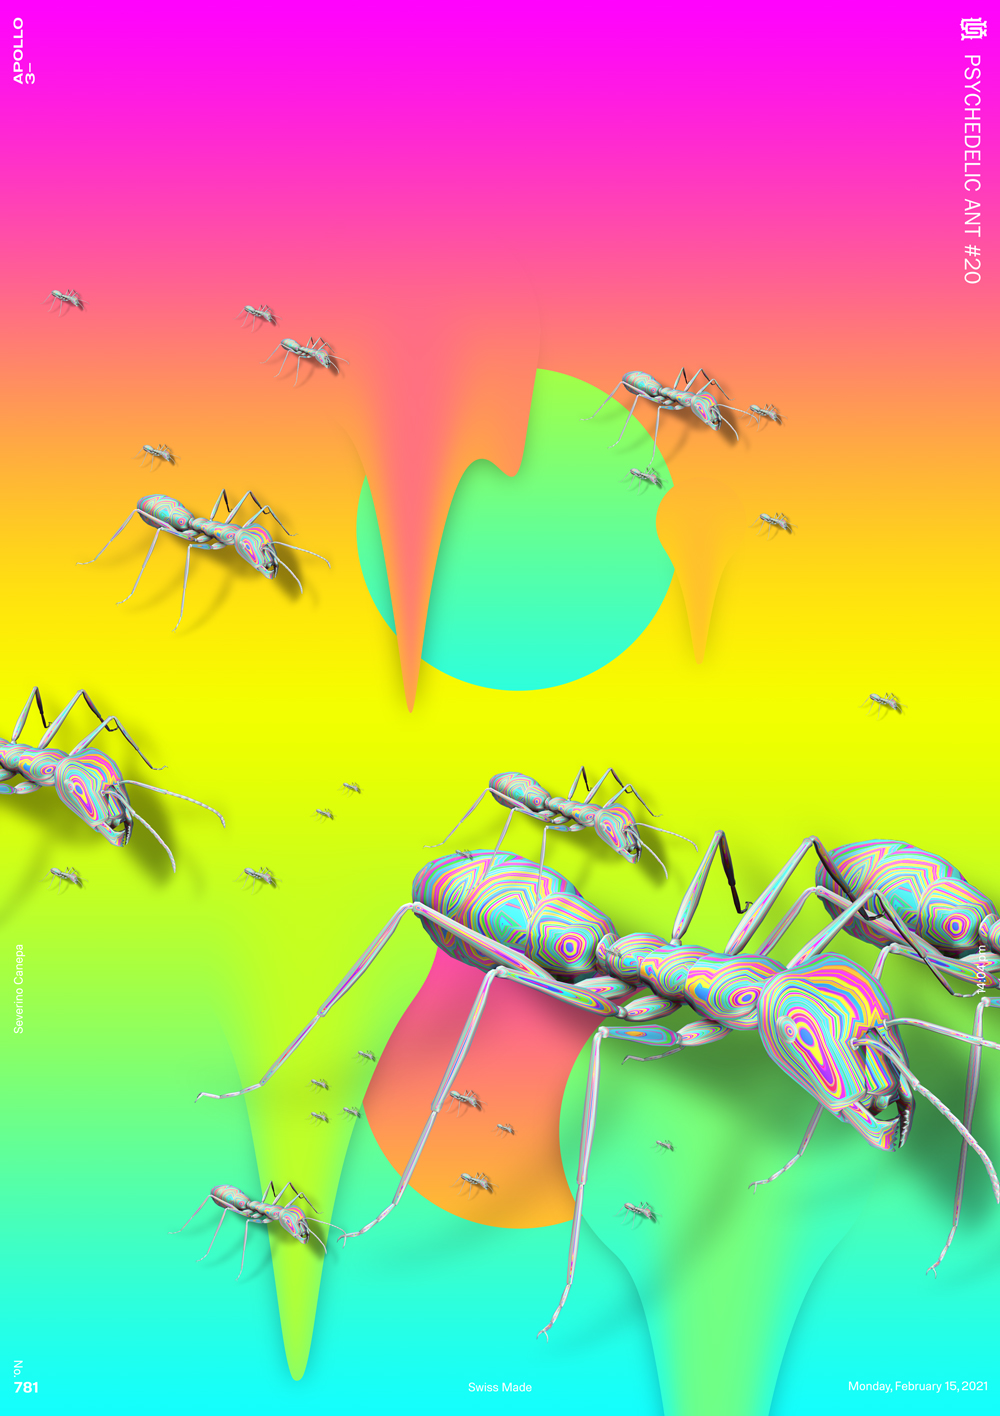 Full background made with a colorful background a many ants